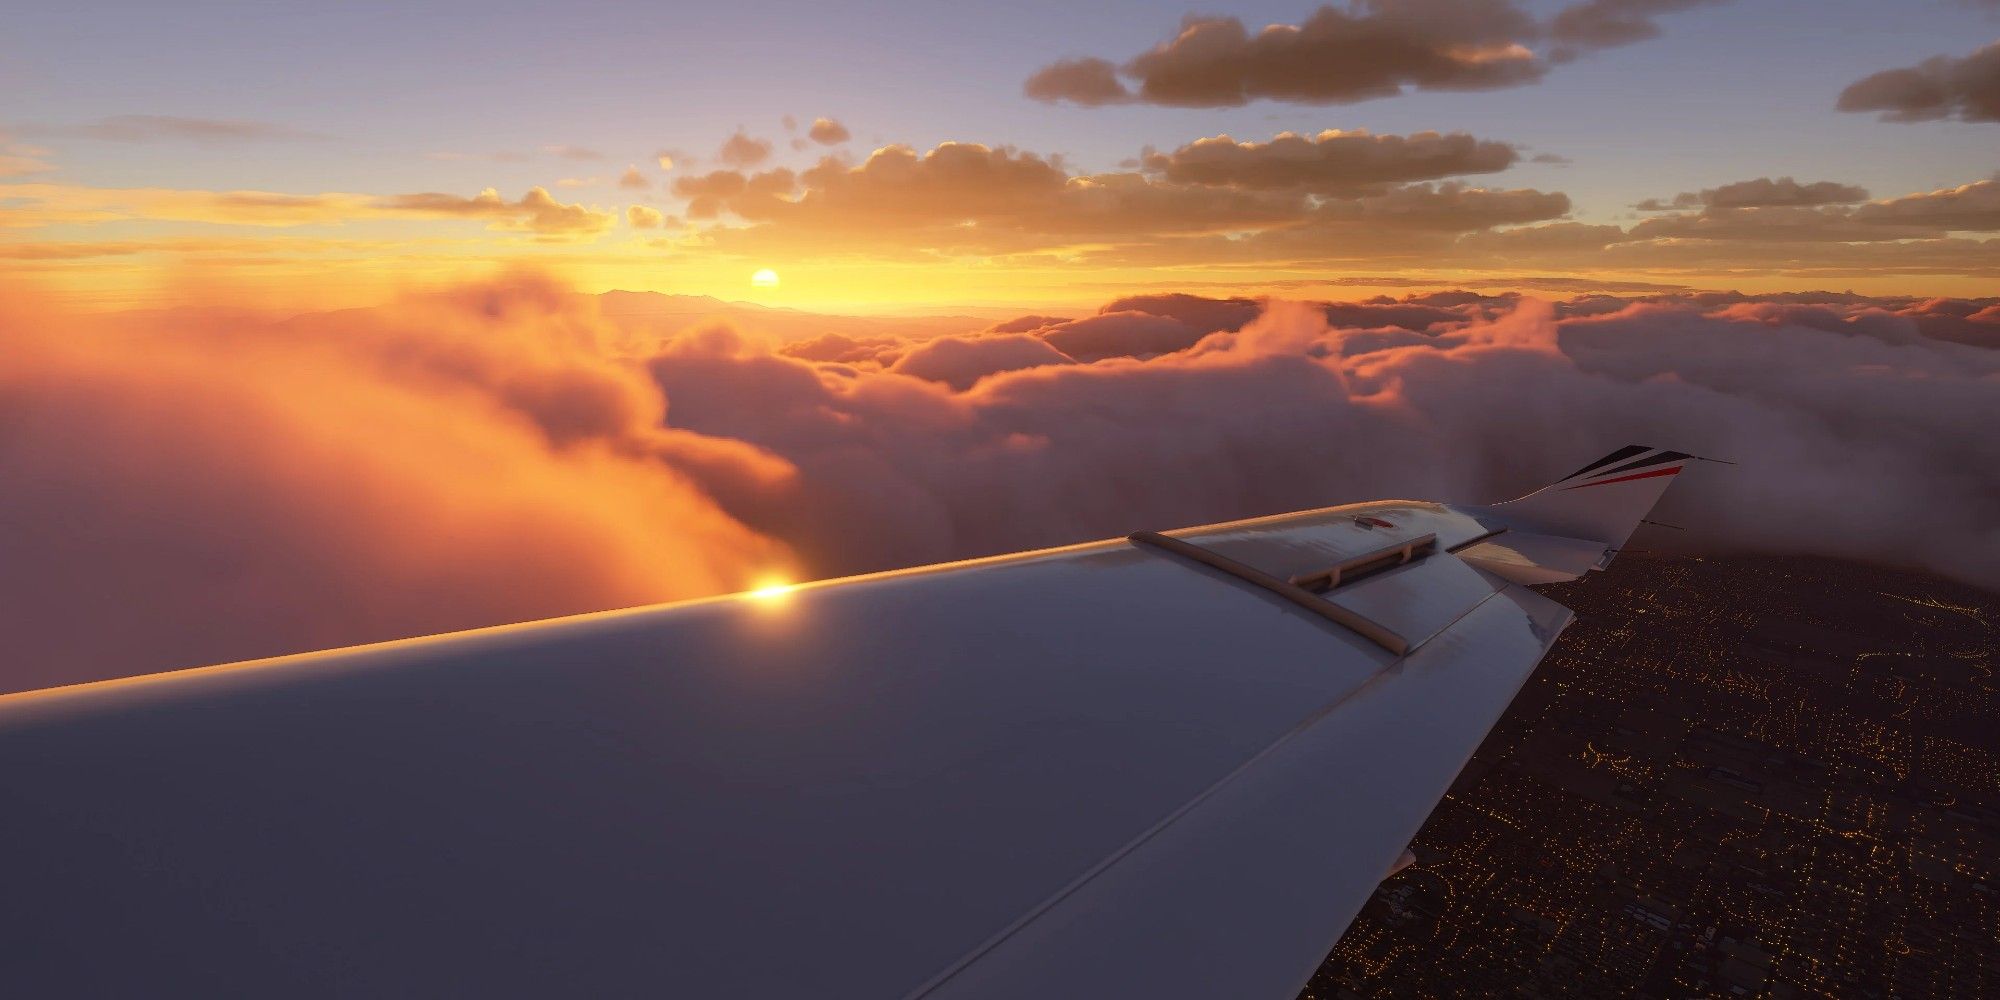 Sunset over a plane wing in Microsoft Flight Simulator